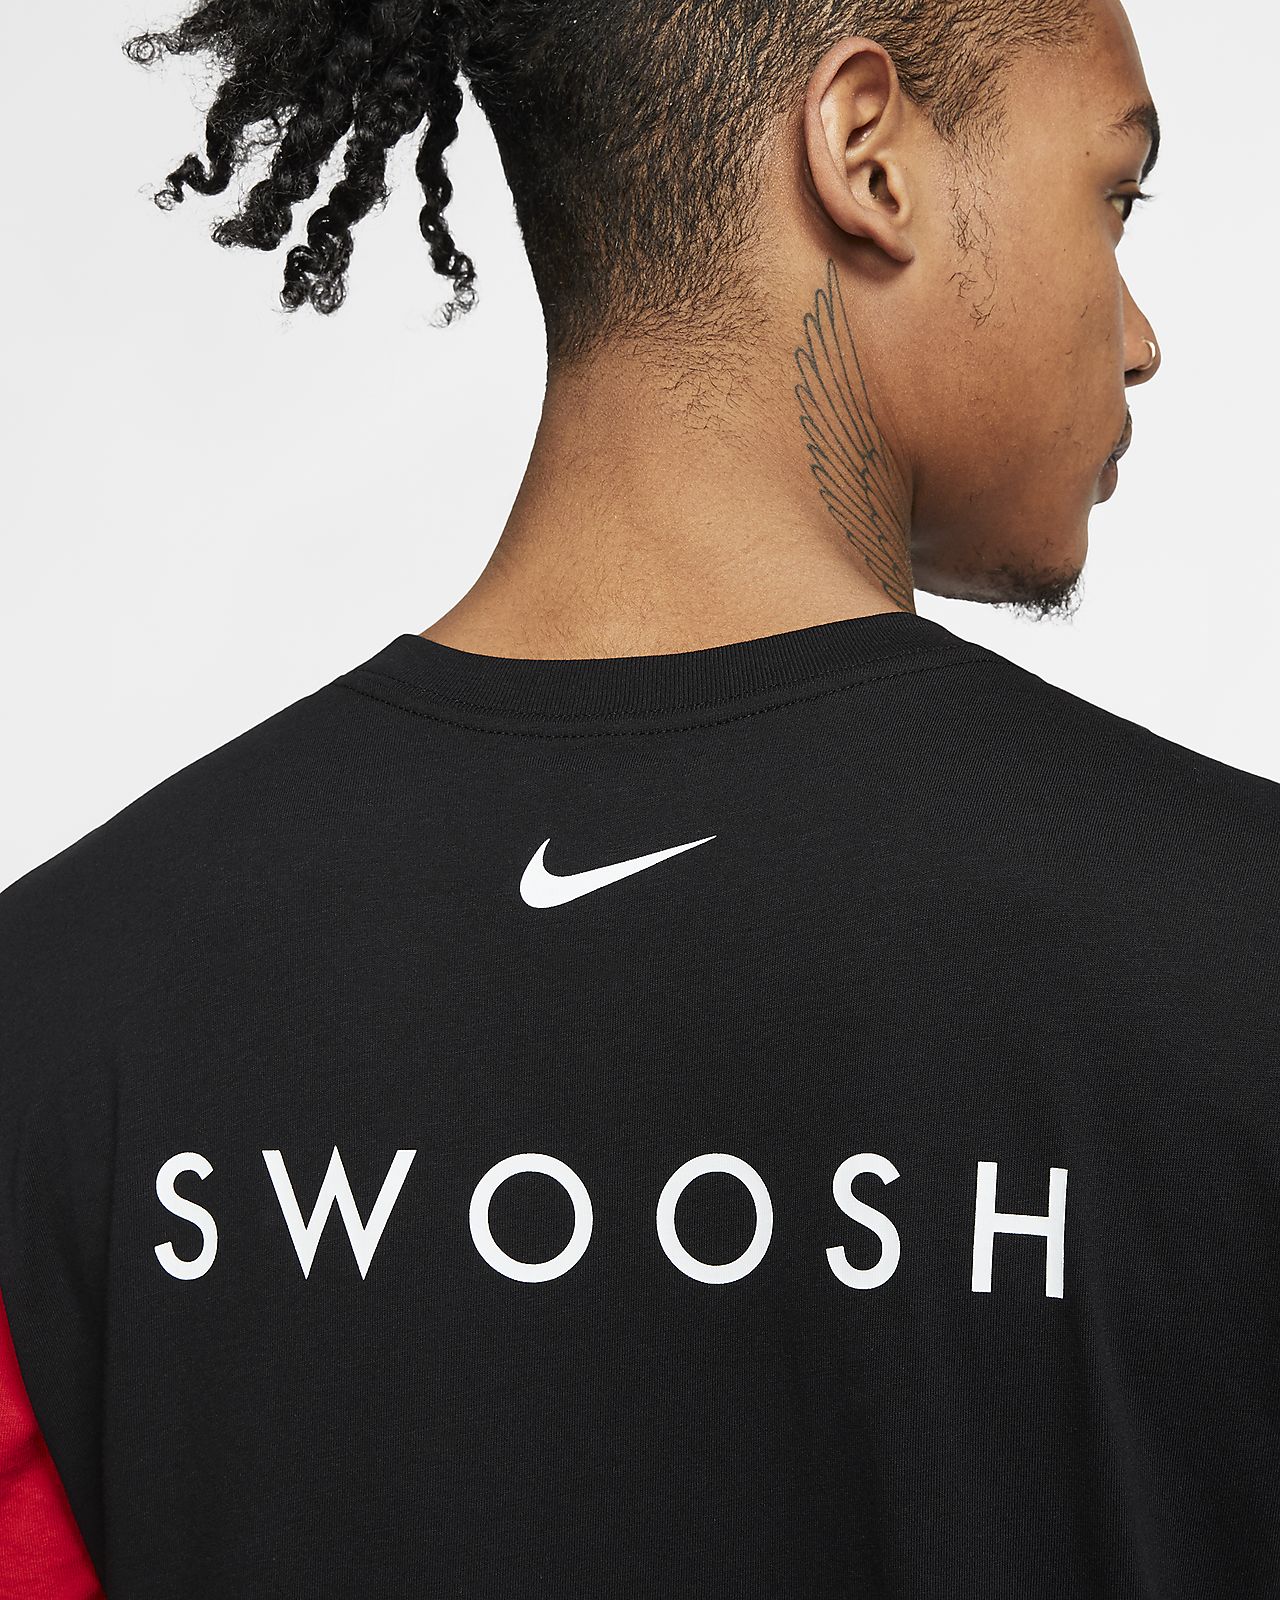 nike t shirt with swoosh in middle